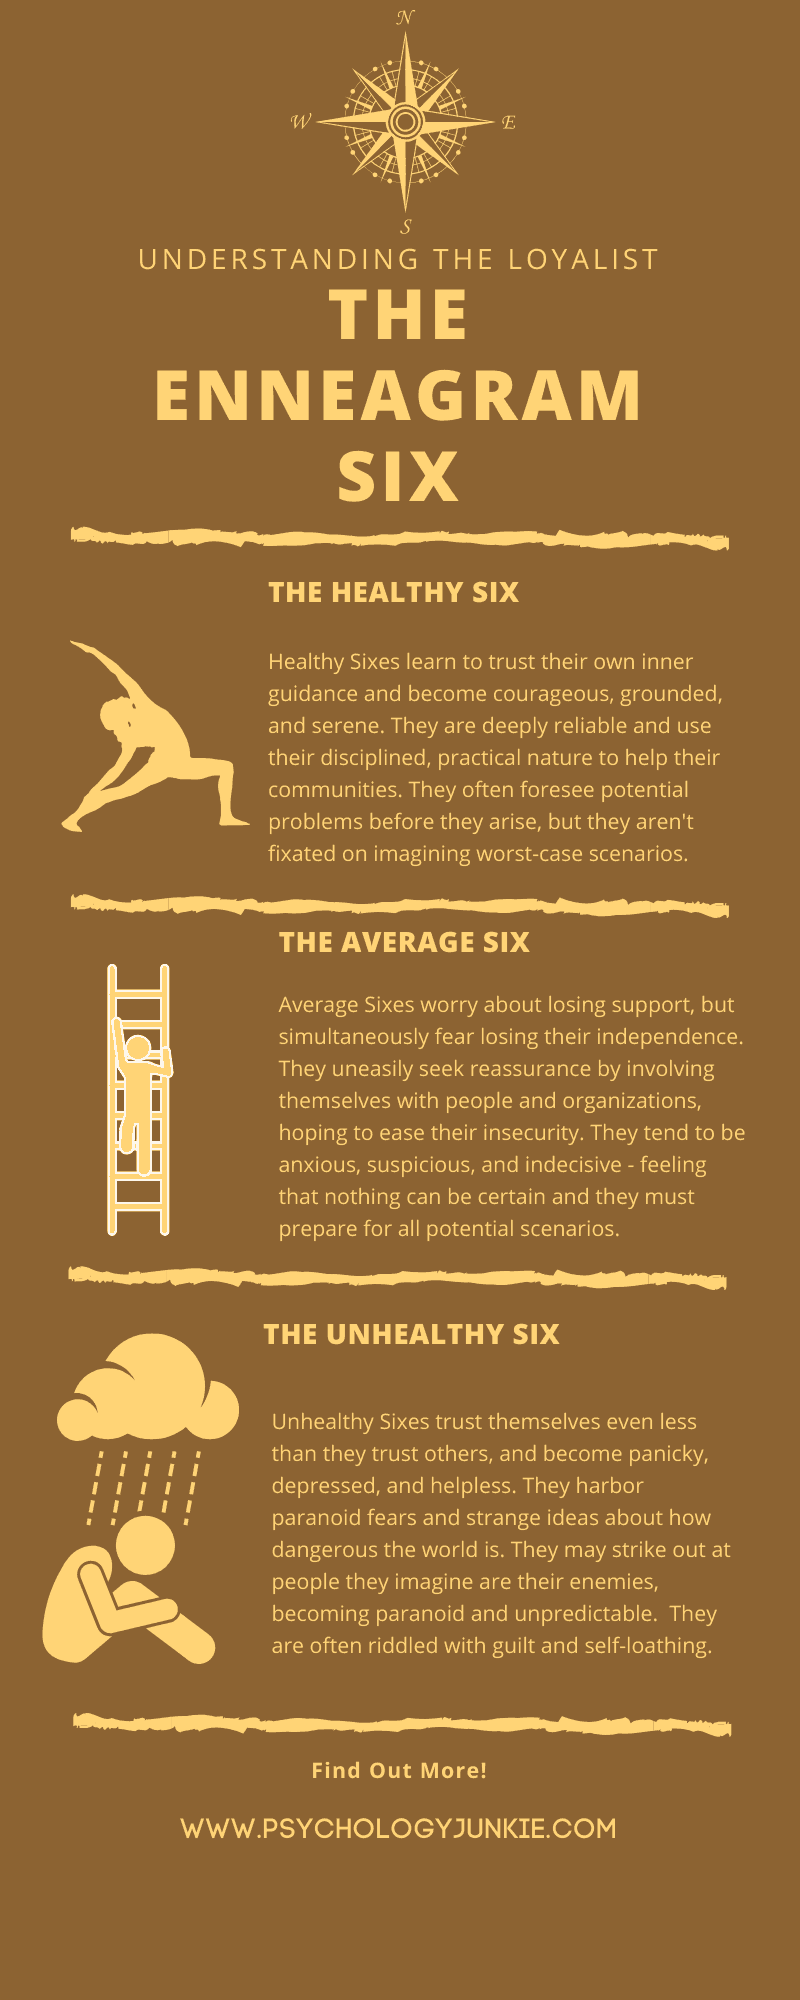 An in-depth #infographic about the various levels of health of the #enneagram six. #enneatype #six